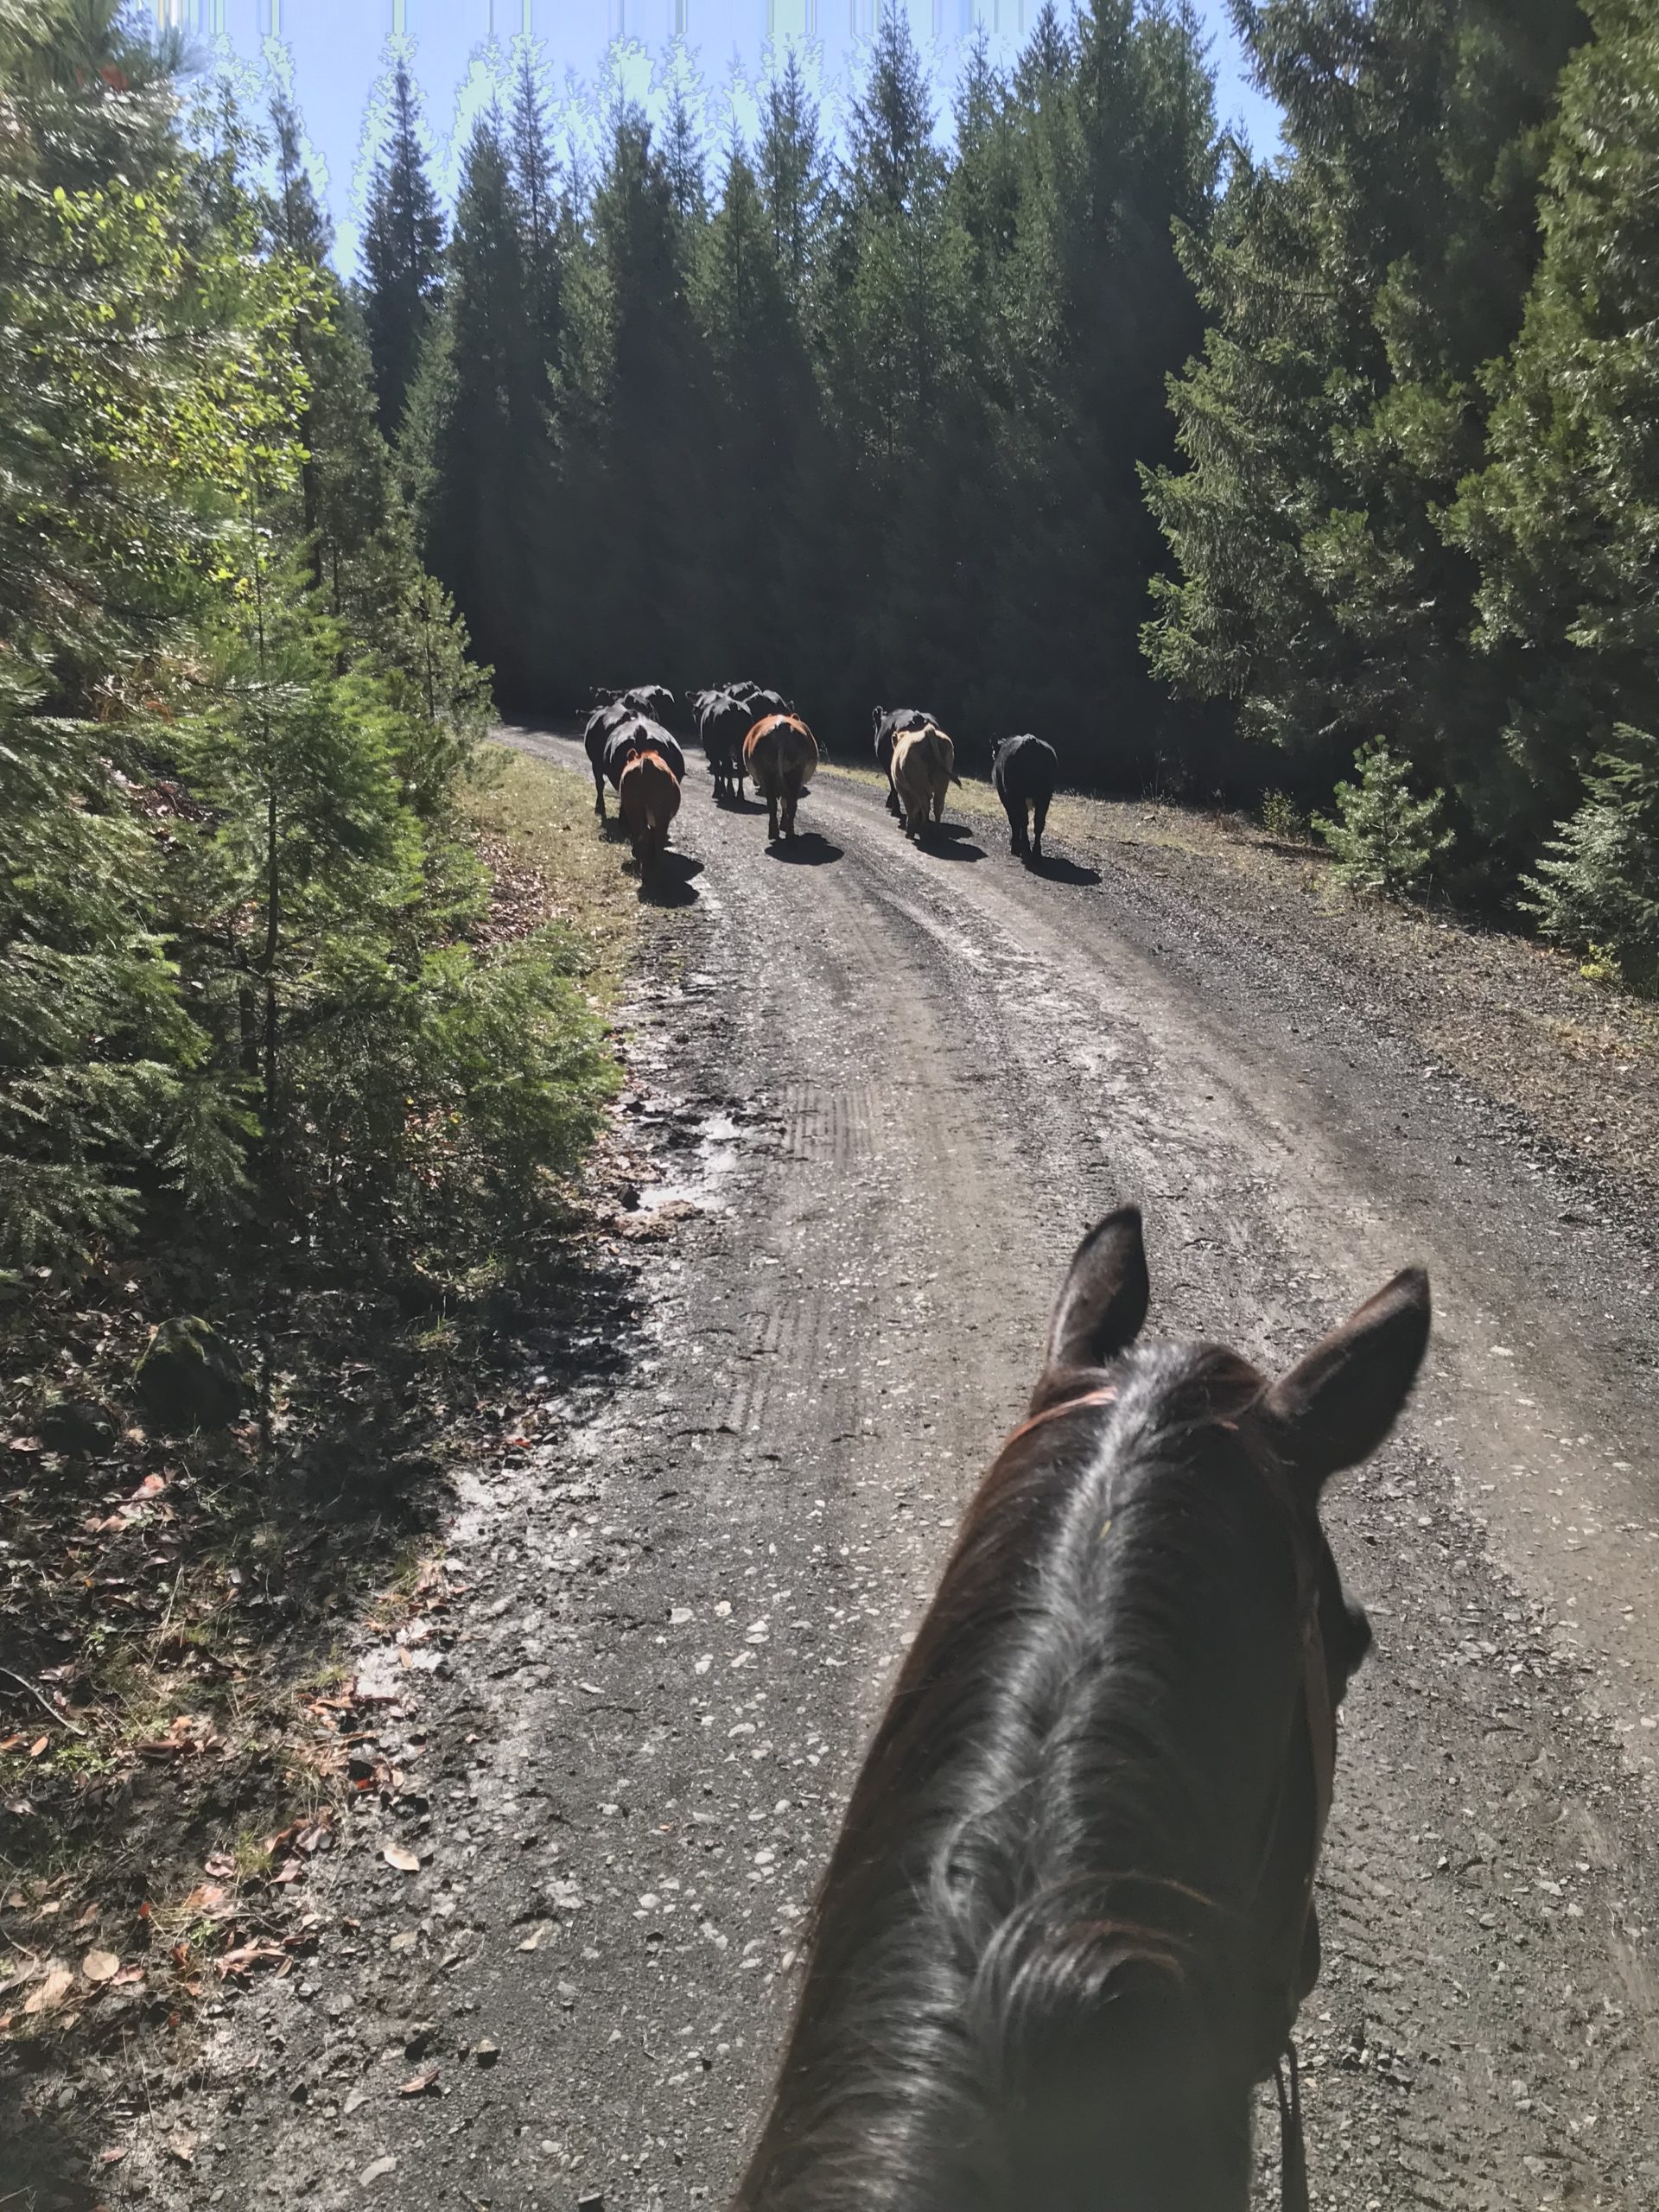 A picture taken from on top of my horse with cattle trailing down the road in front of us.